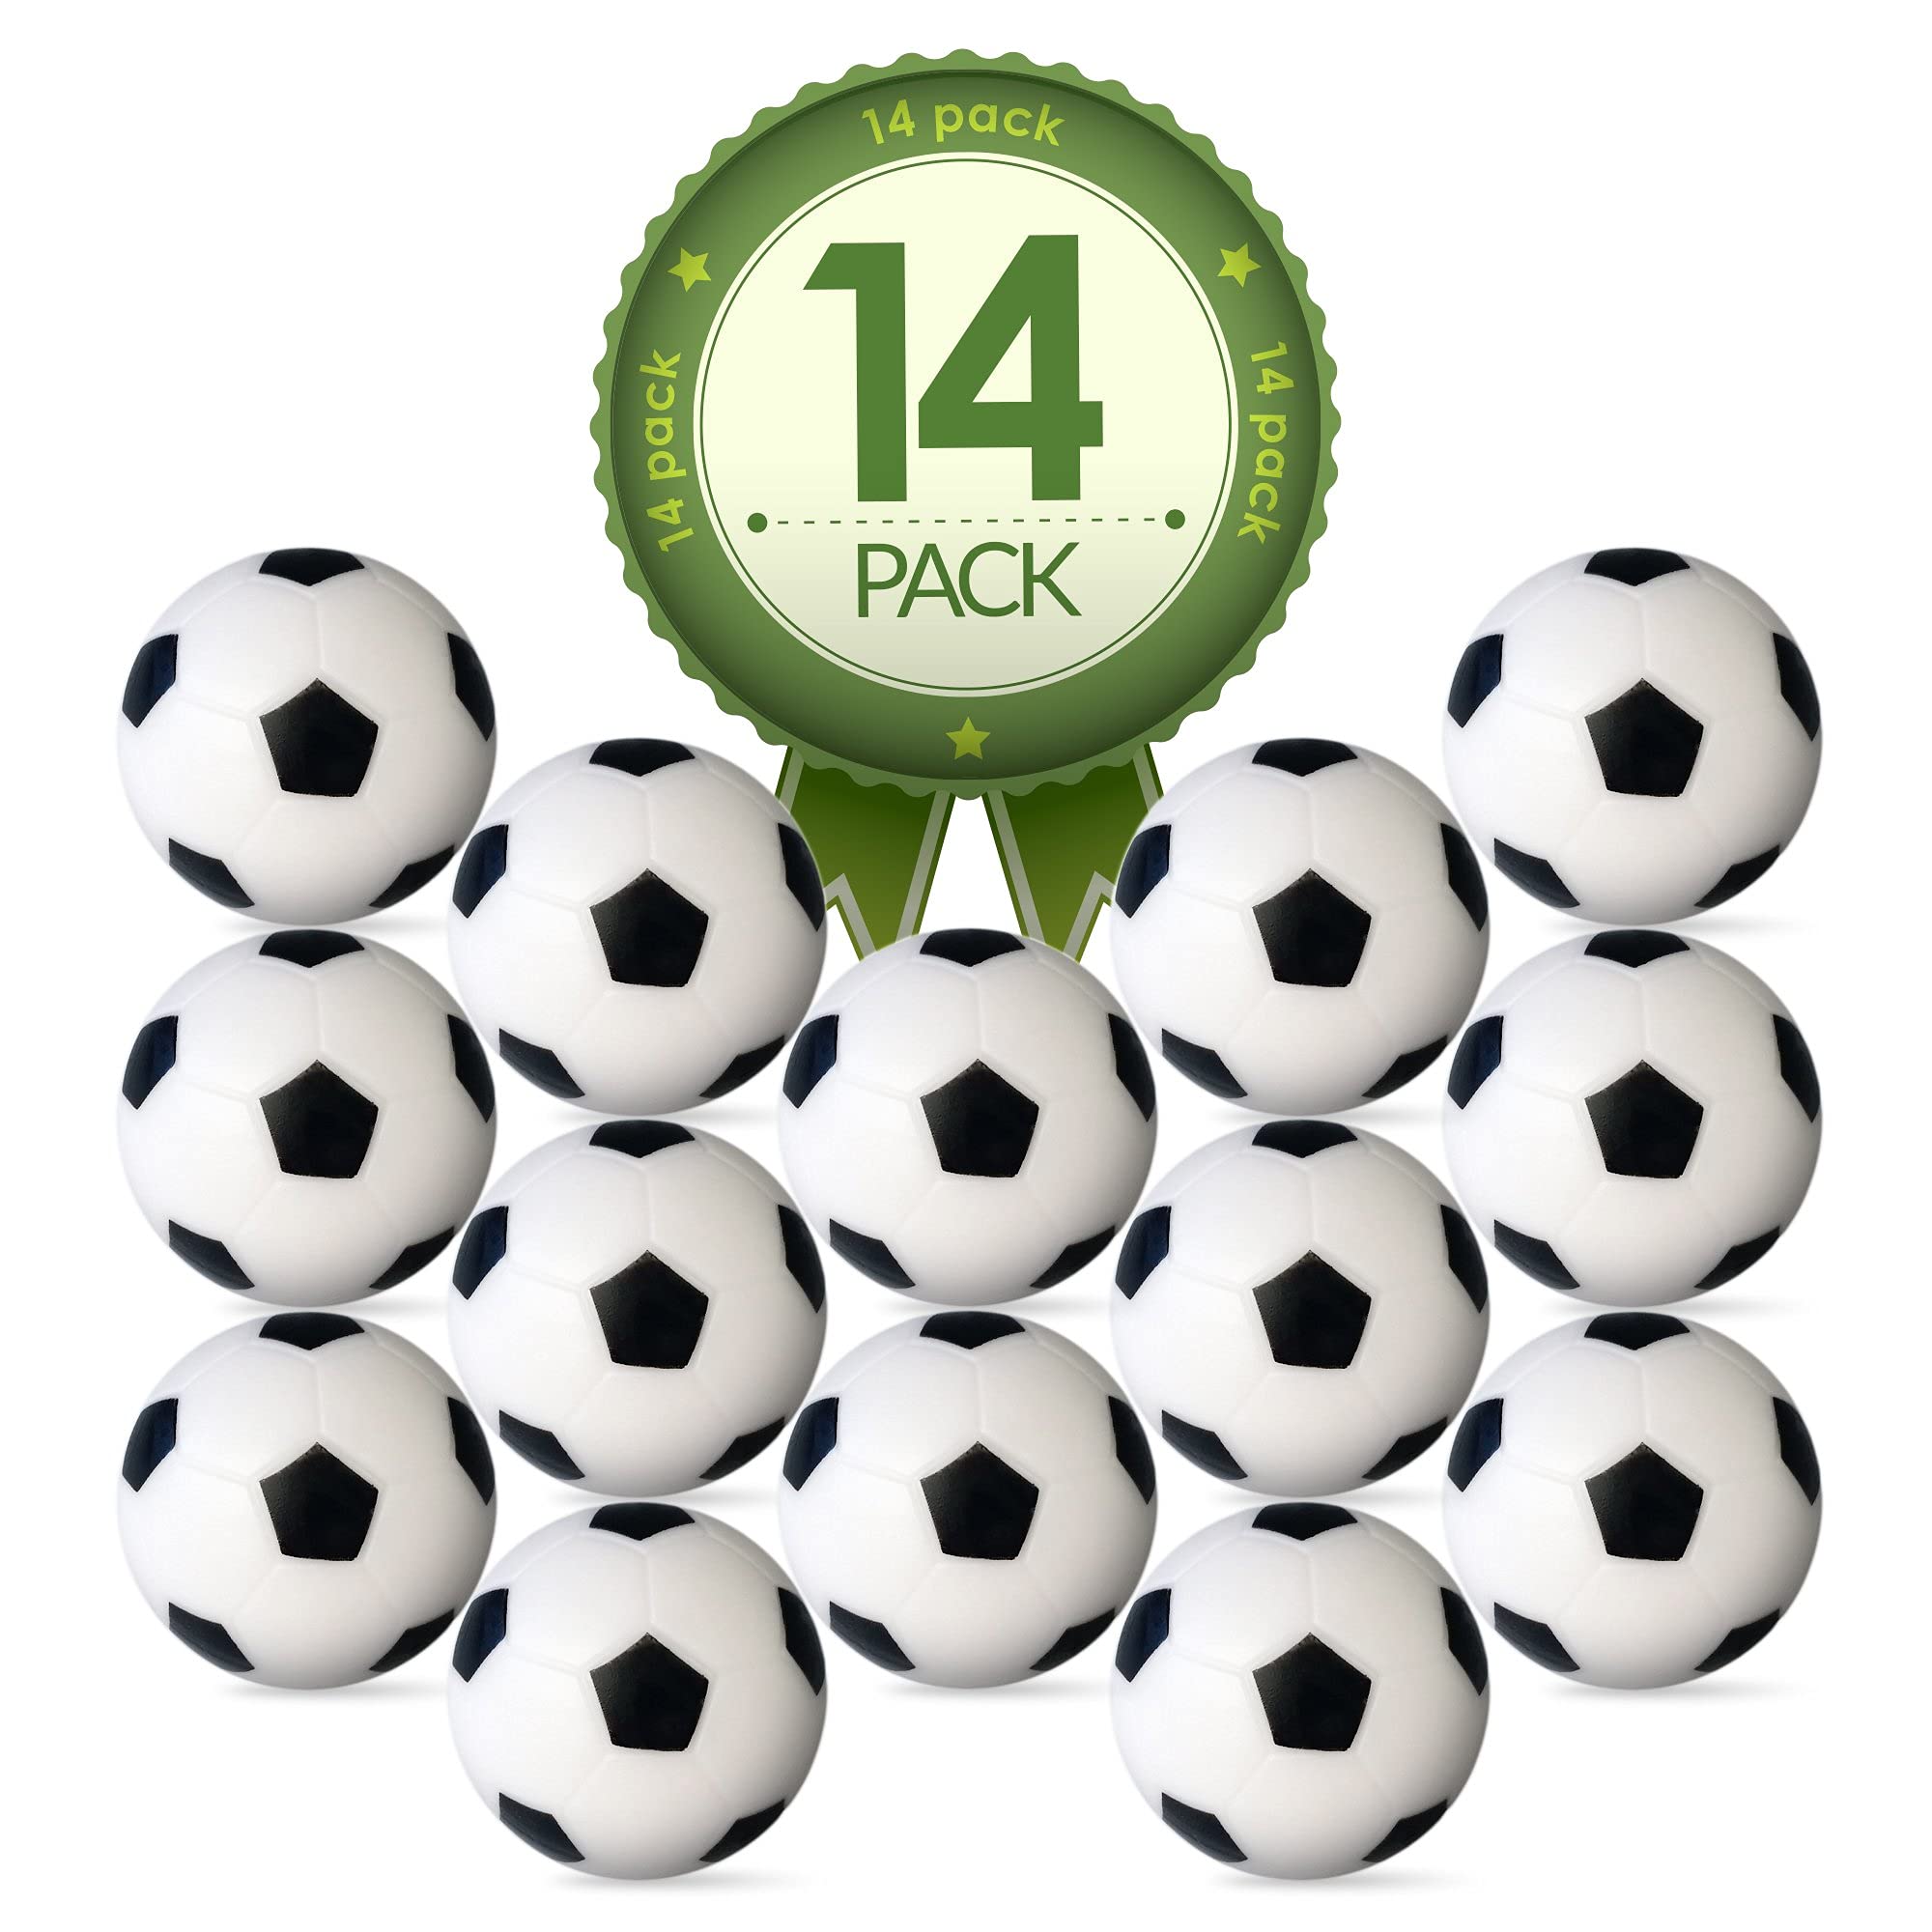 Colonel Pickles Novelties Foosball Table Replacement Foosballs- 14 Pack - 36mm Game Table Size - Black and White Tabletop Soccer Balls